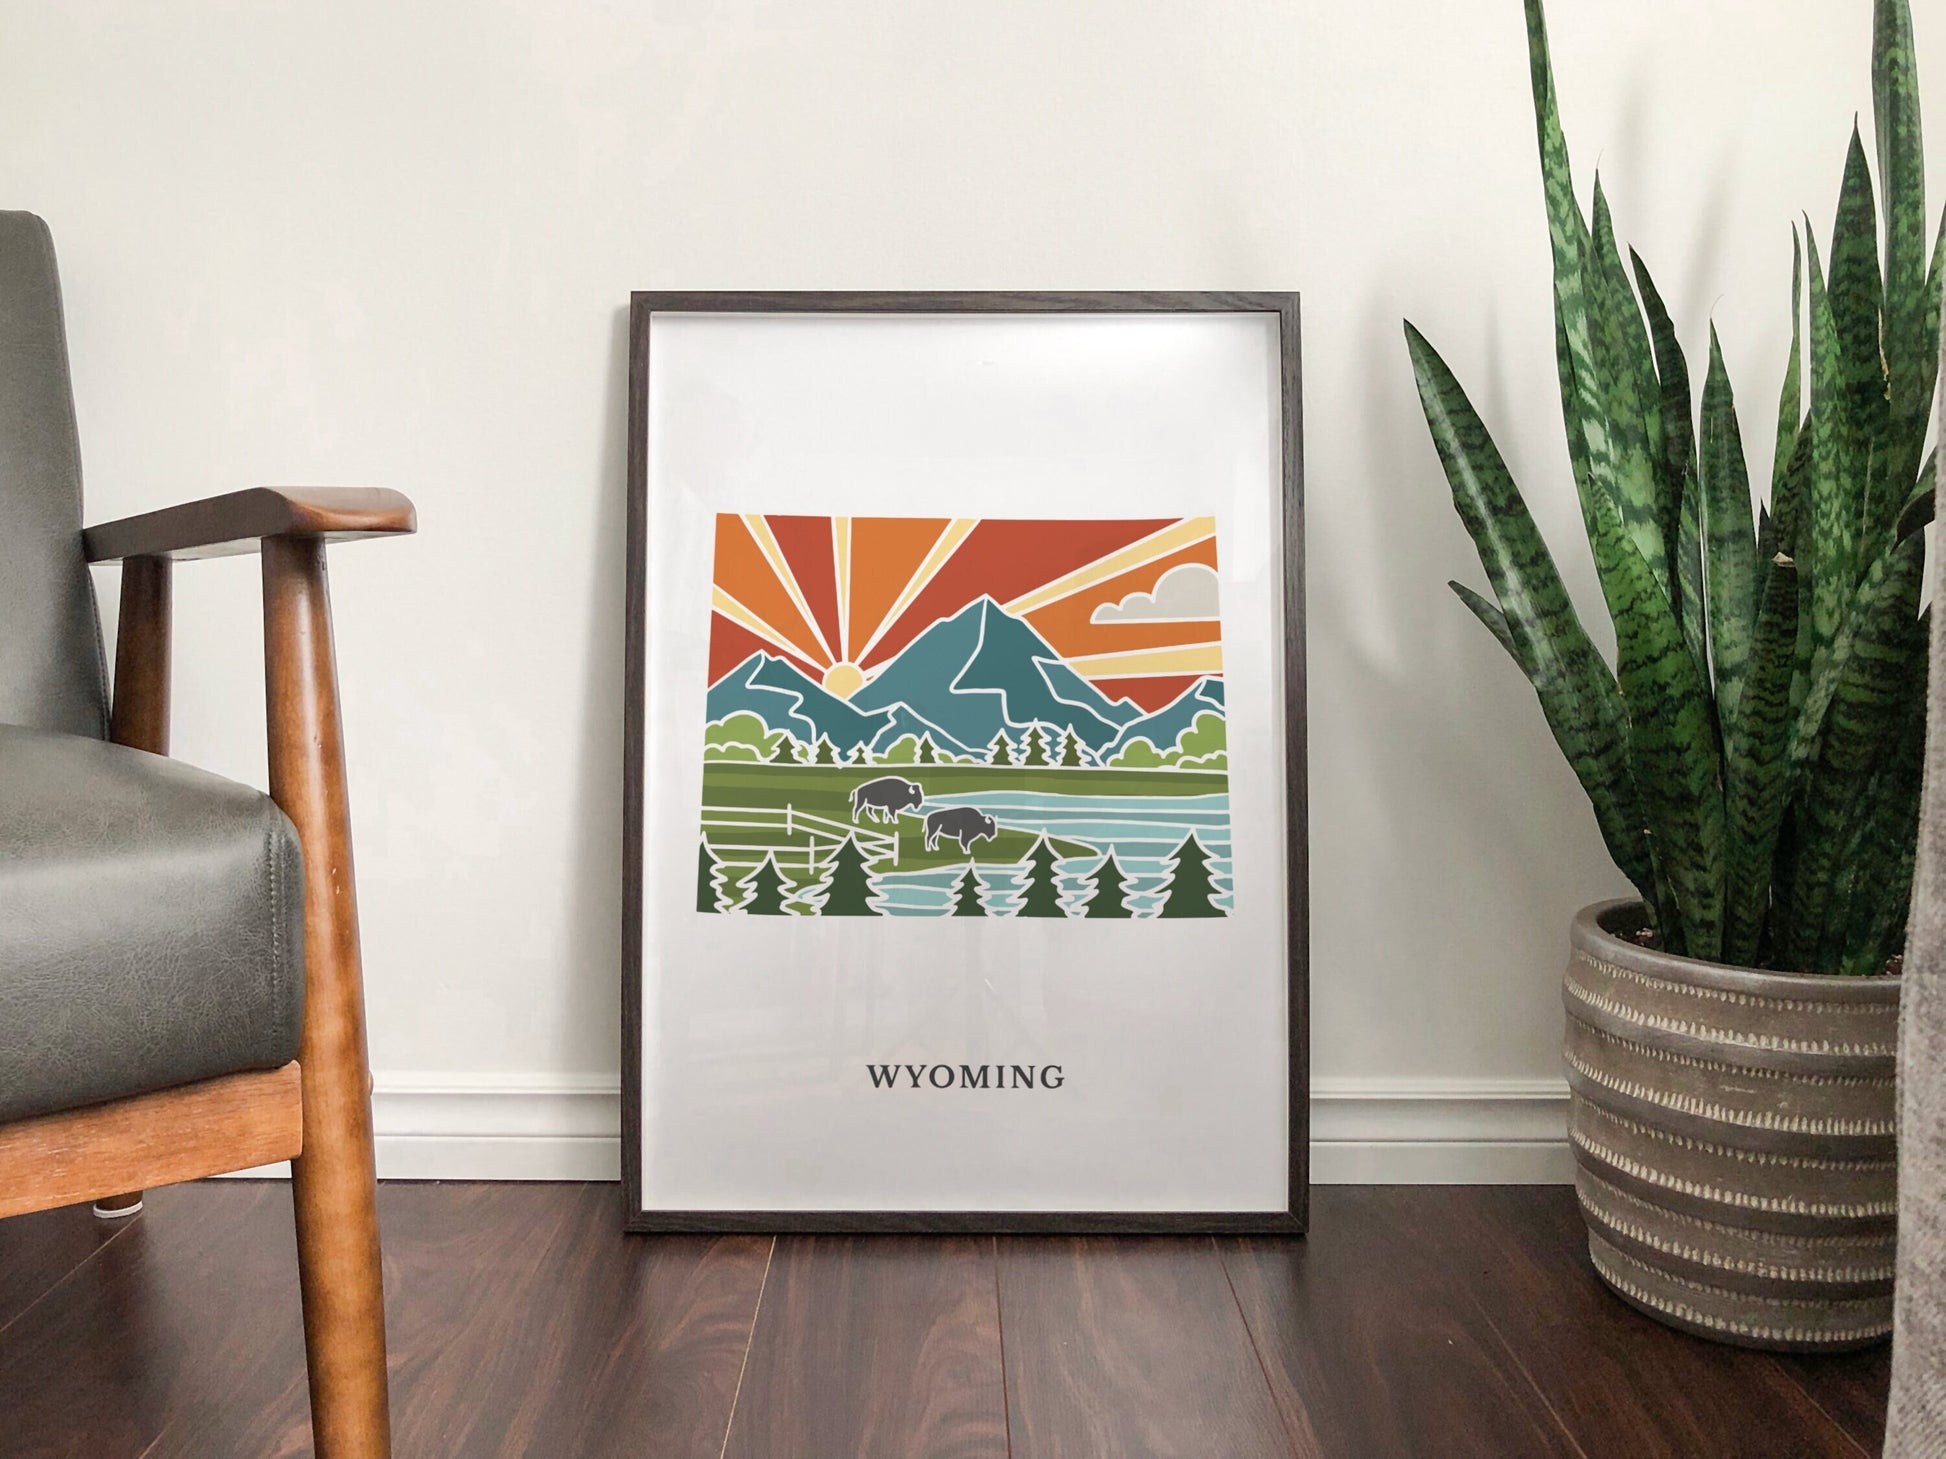 Wyoming Physical Art Print | State Wall Art | 5x7, 8x10, 11x14, 16x20 Archival Art Print | Wyoming Illustrated Poster